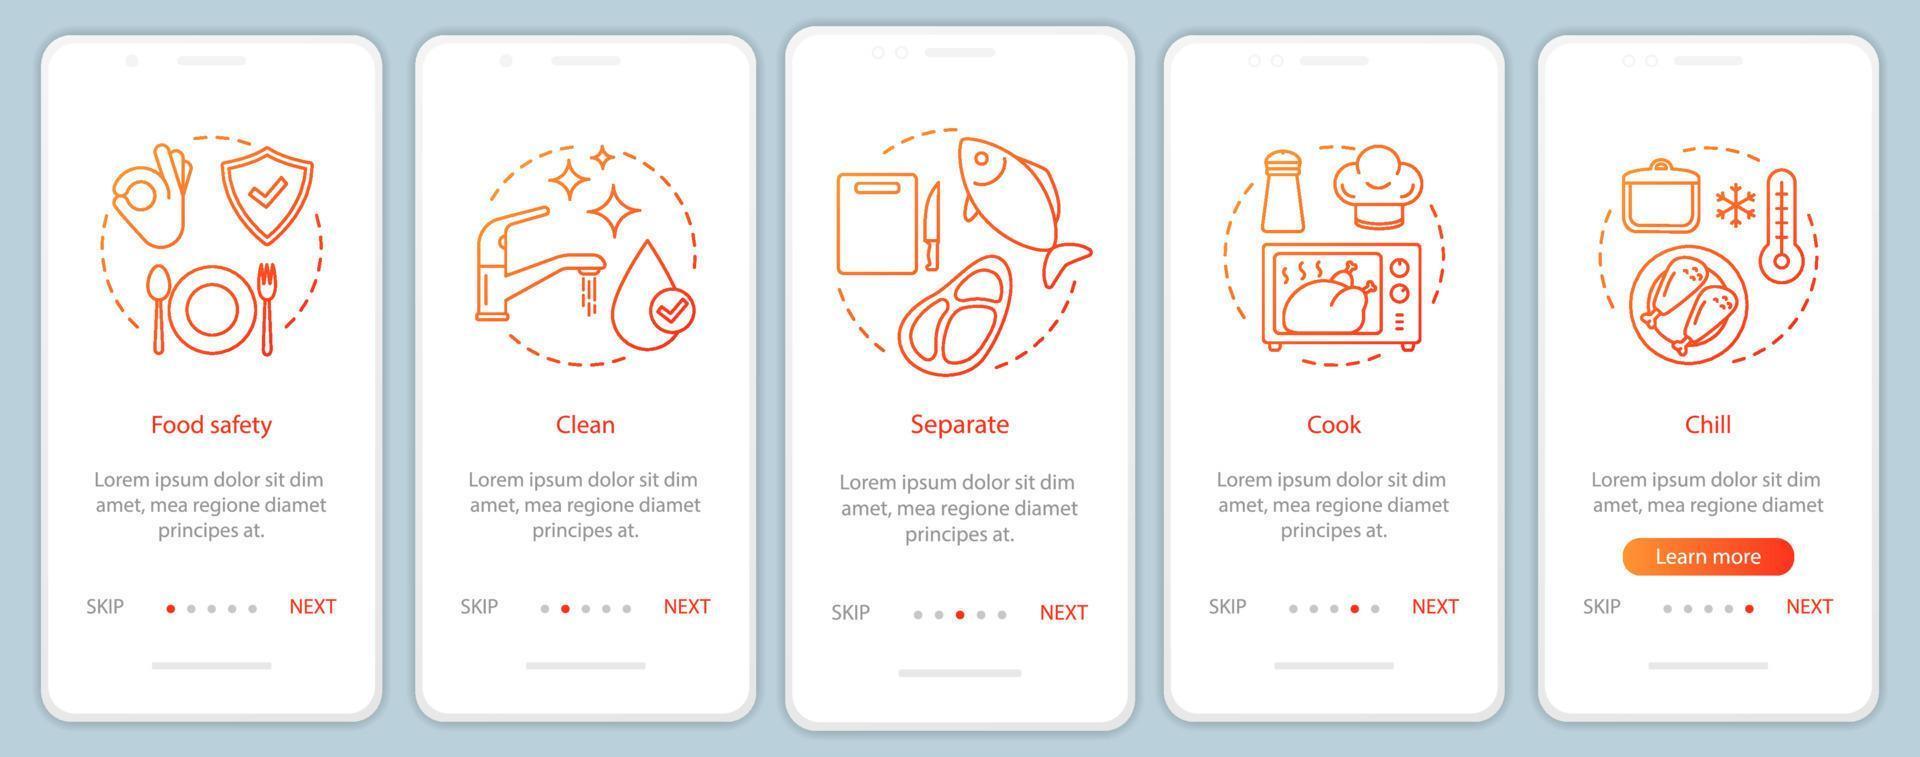 Food safety onboarding mobile app page screen template. Food processing, handling, preparation and storage. Clean, separate, cook, chill. Walkthrough website steps. UX, UI, GUI smartphone interface vector